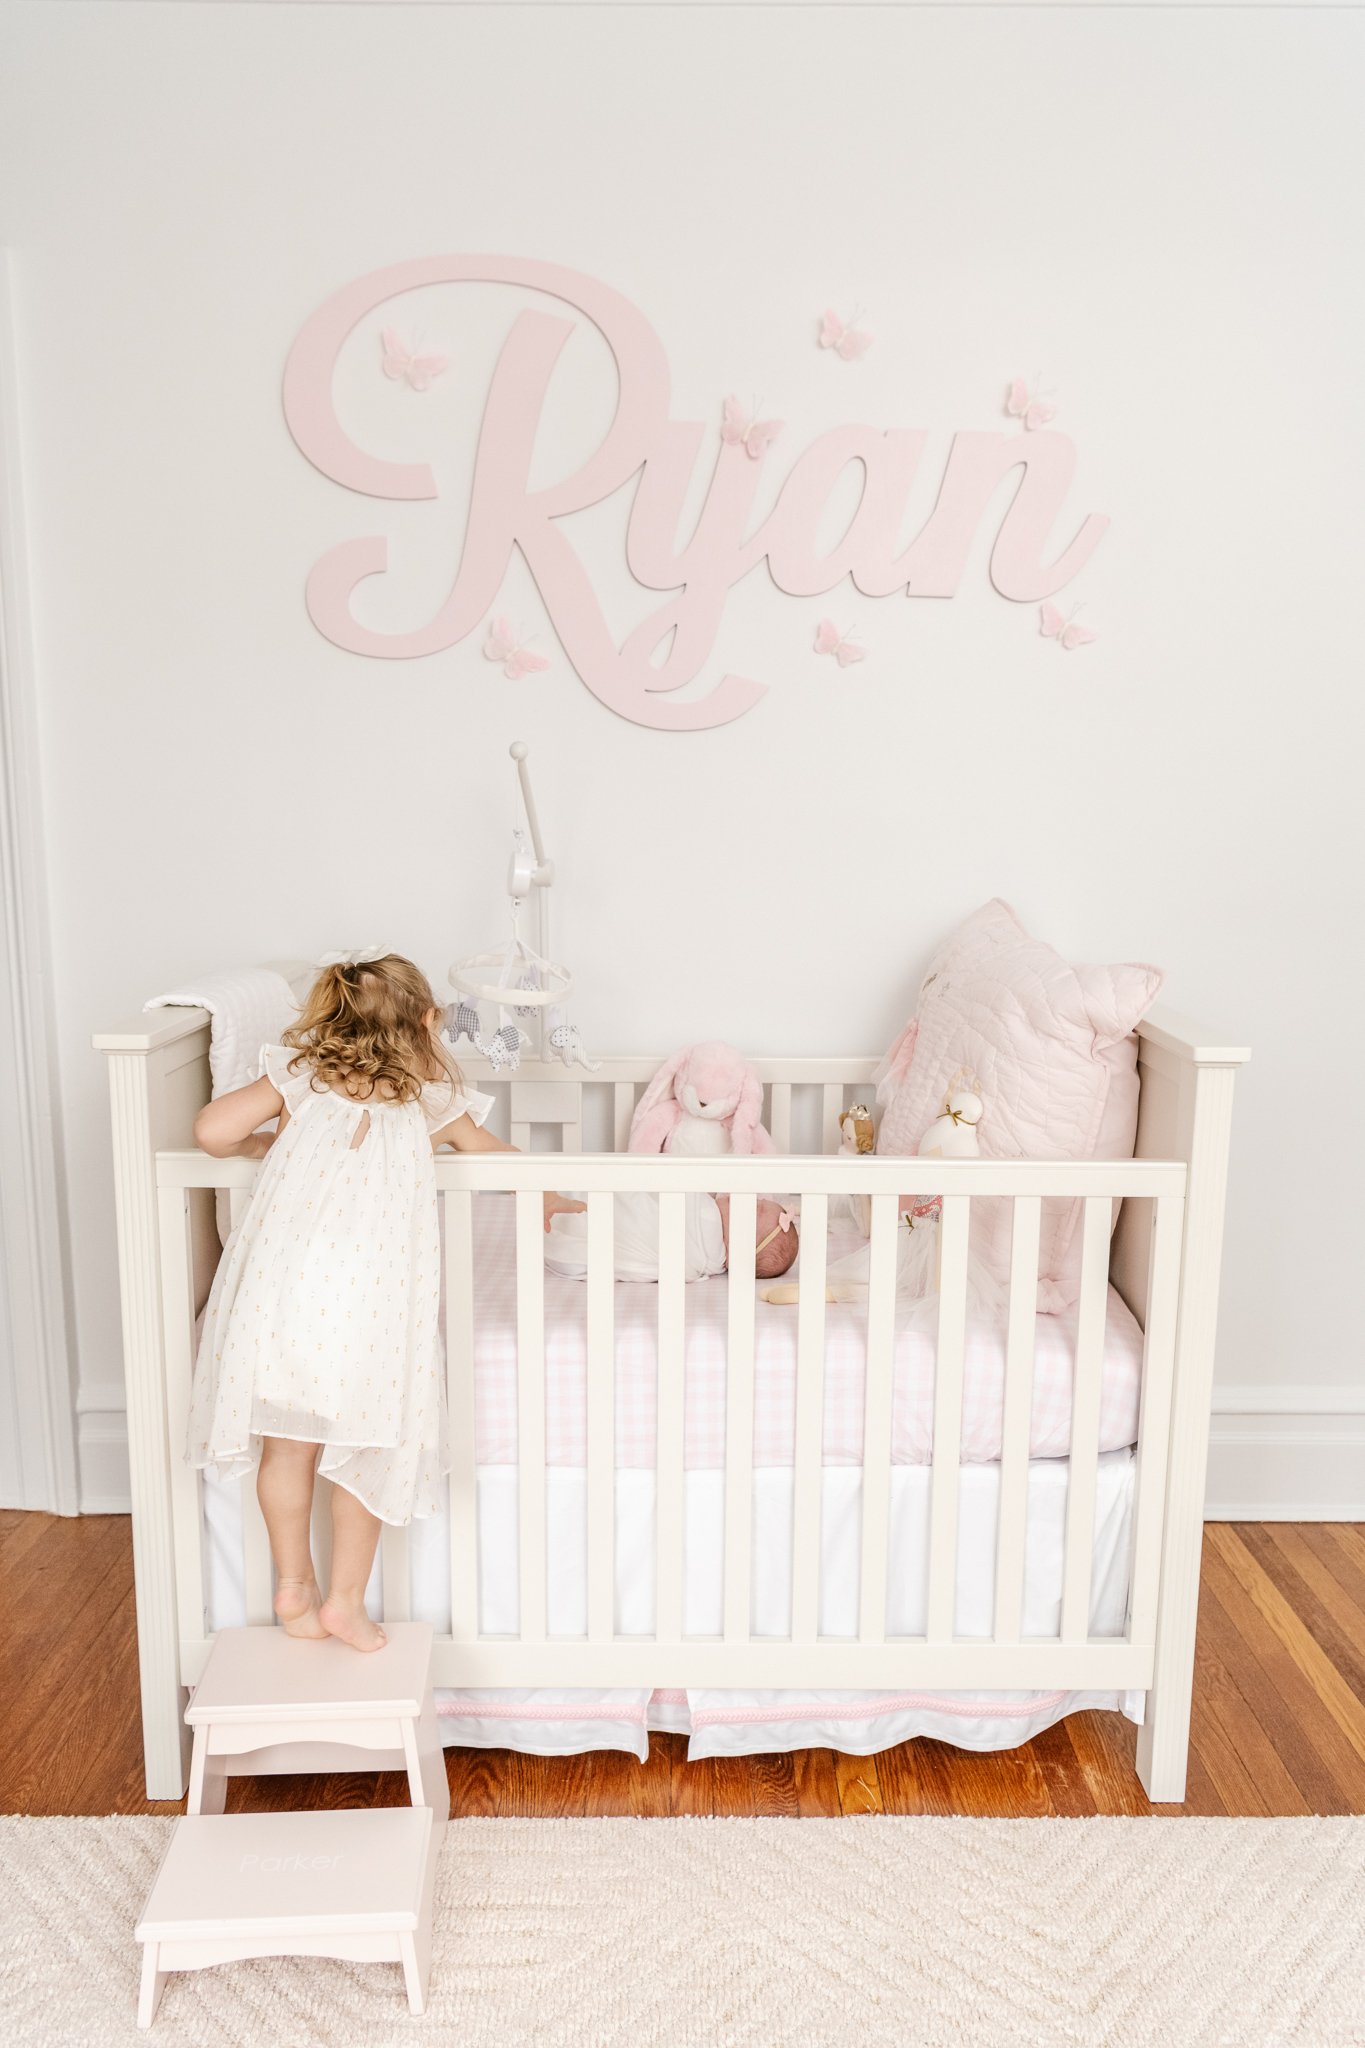  A toddler little girl is captured checking on her sister in her crib by Nicole Hawkins Photography. big sister toddler girl new baby #NicoleHawkinsPhotography #NicoleHawkinsNewborns #Babygirl #Newbornfamilyportraits #ChathamNewbornPhotographer #InHo